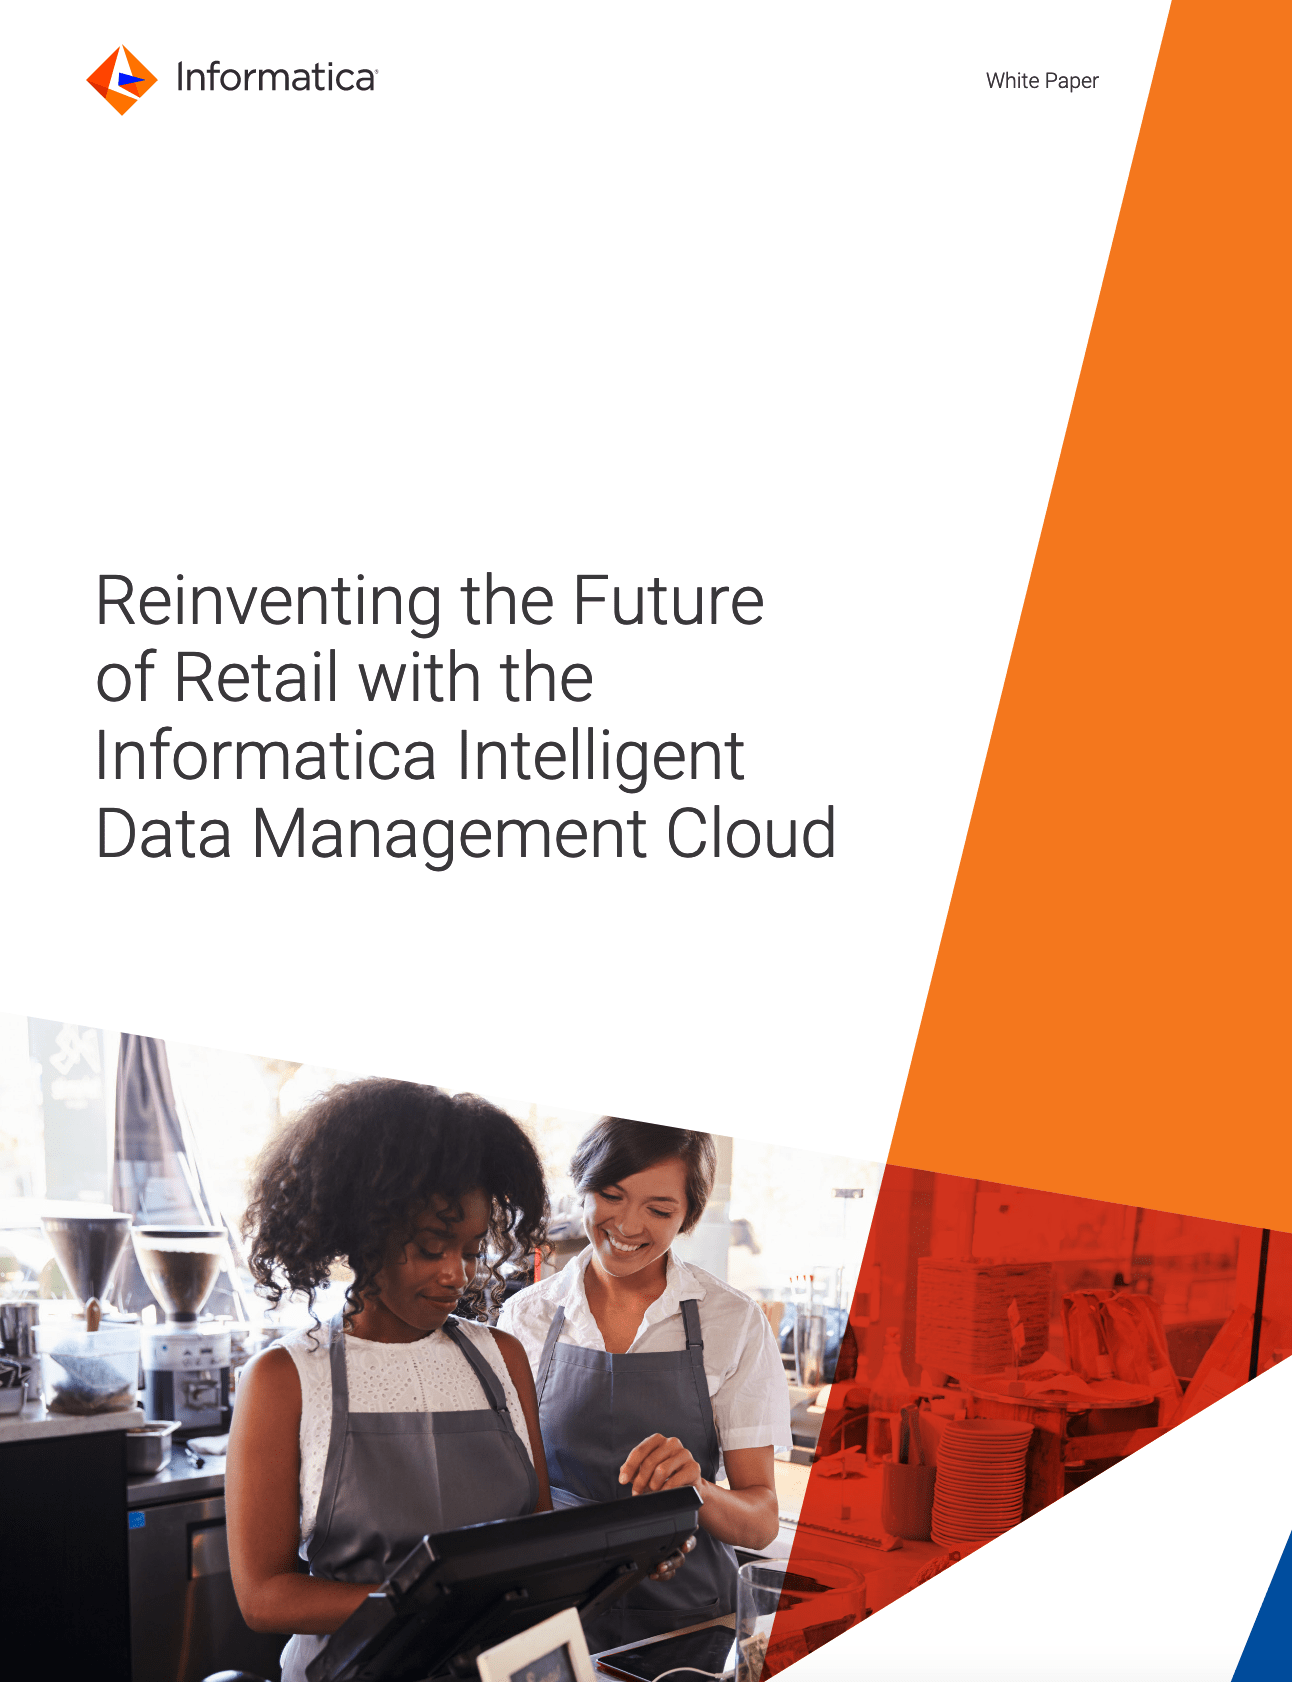 Reinventing the Future - Reinventing the Future of Retail with the Informatica Intelligent Data Management Cloud